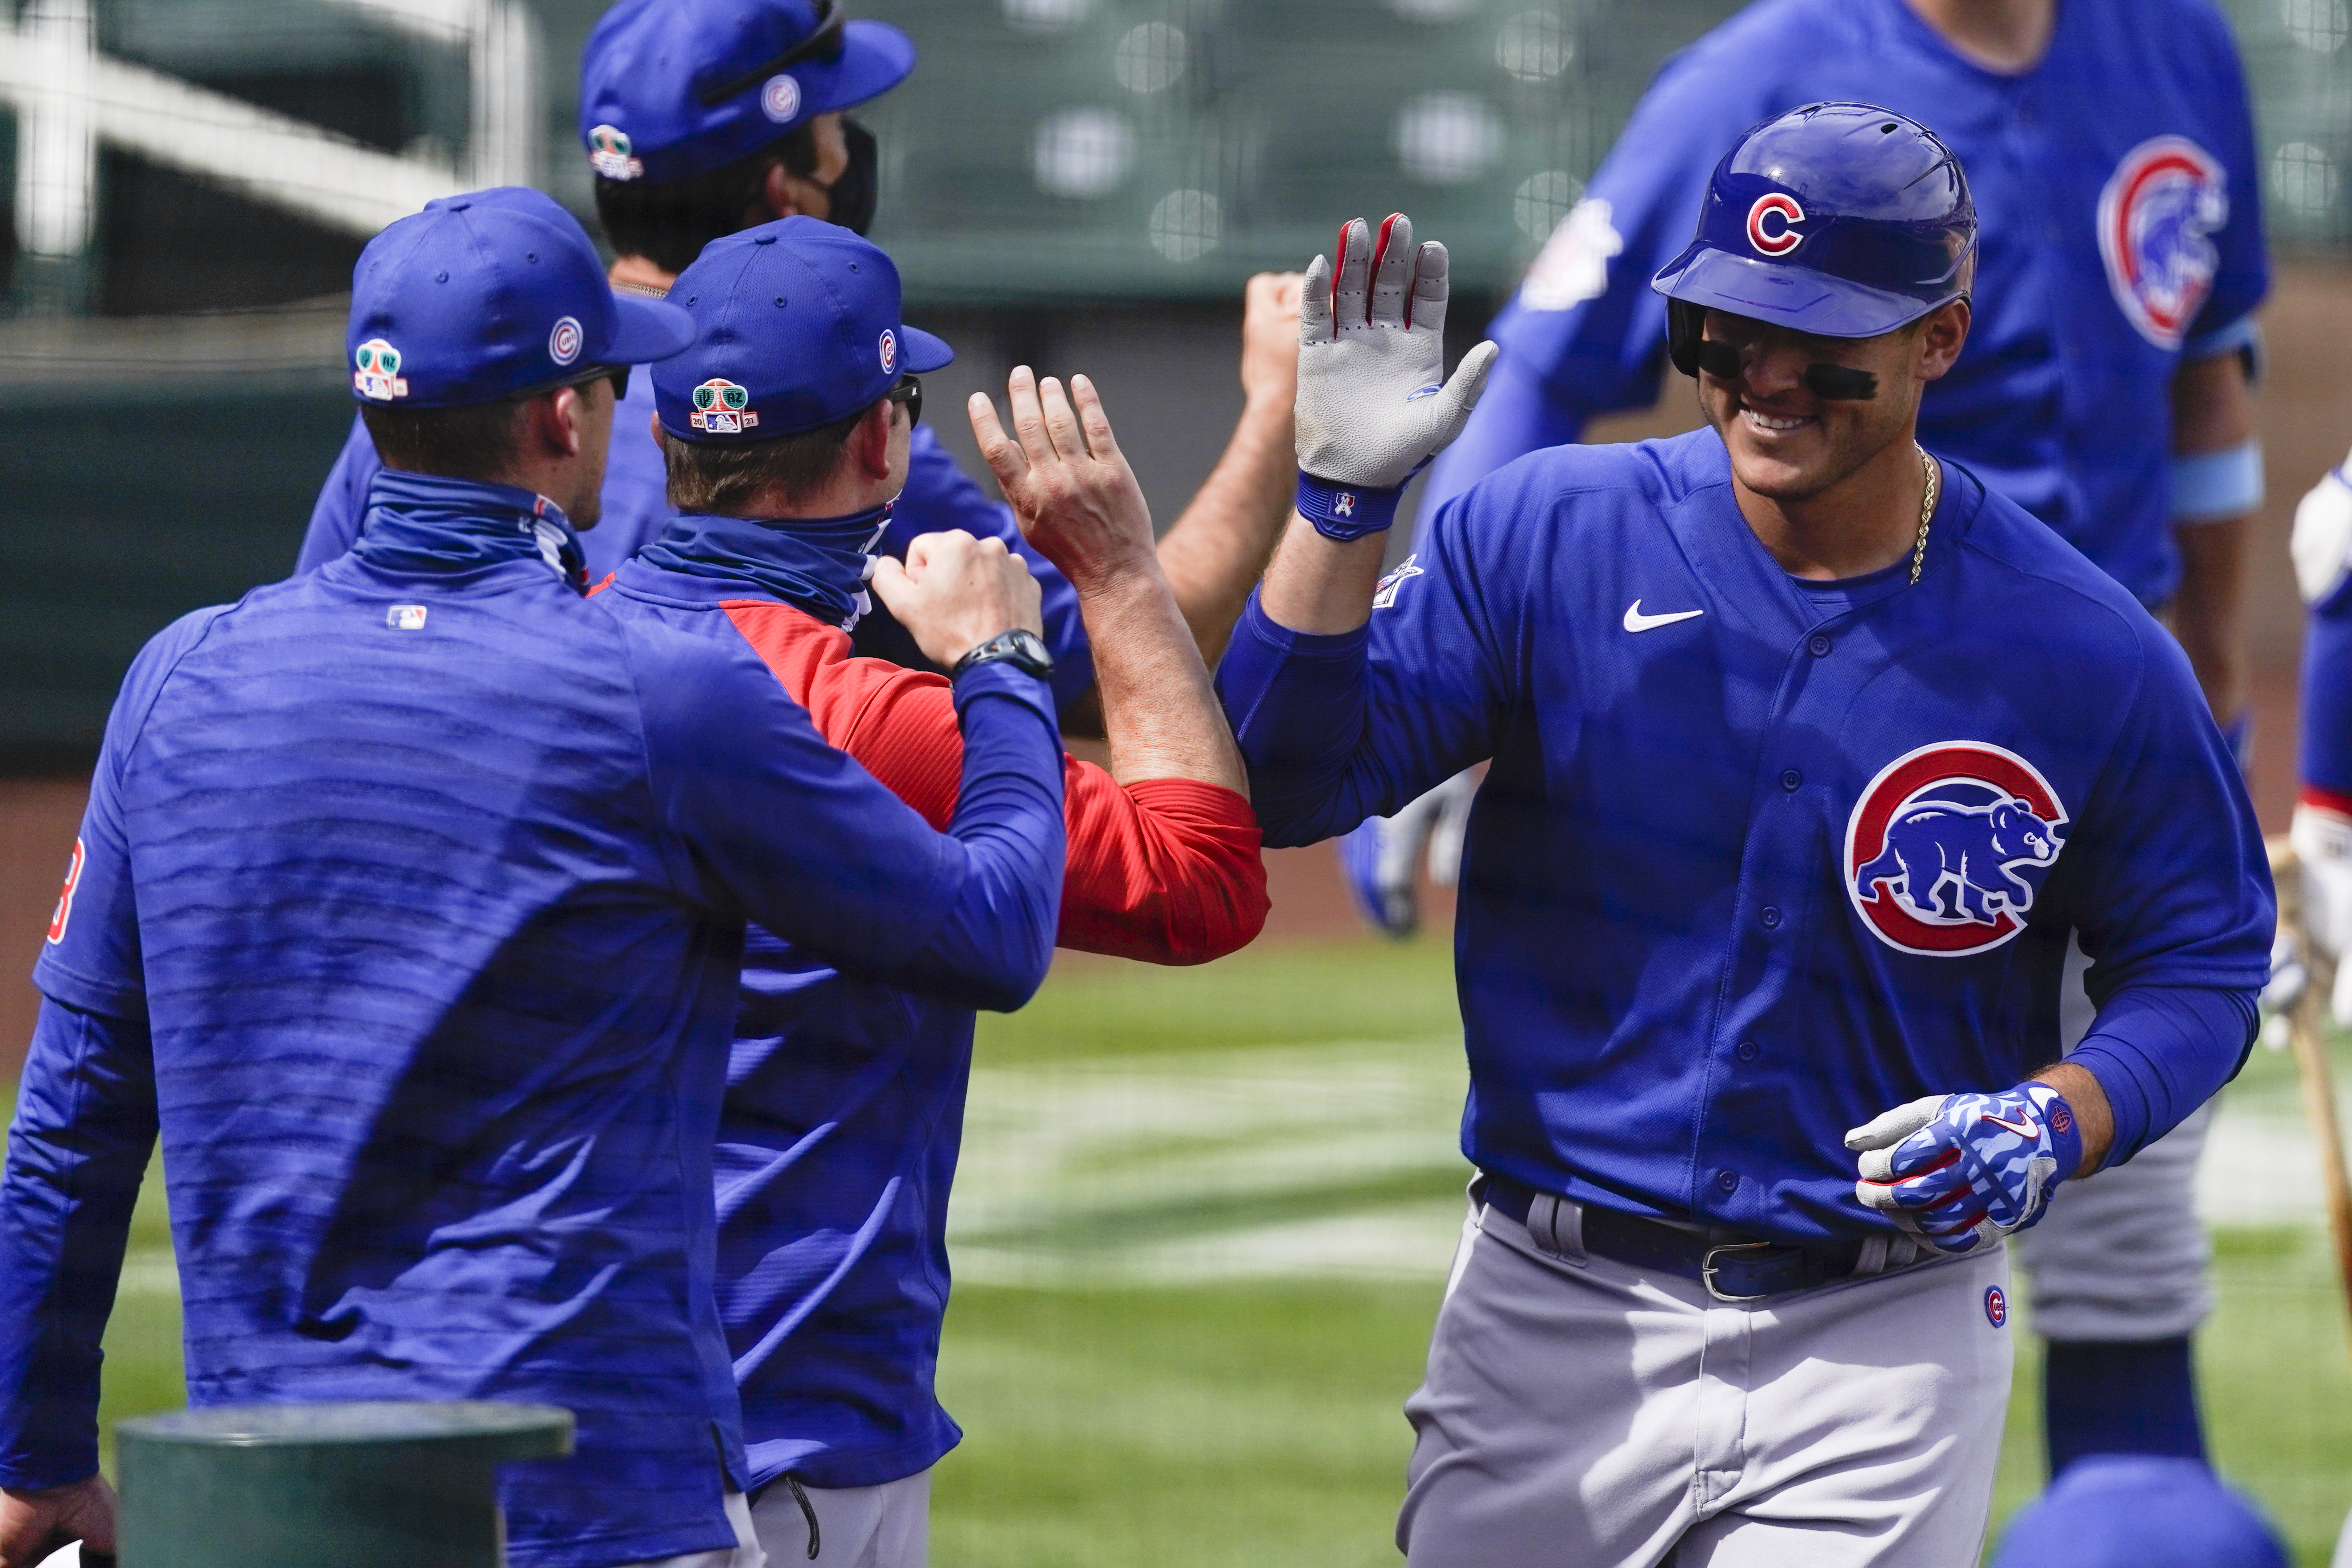 Cactus League: Anthony Rizzo in a groove for Chicago Cubs